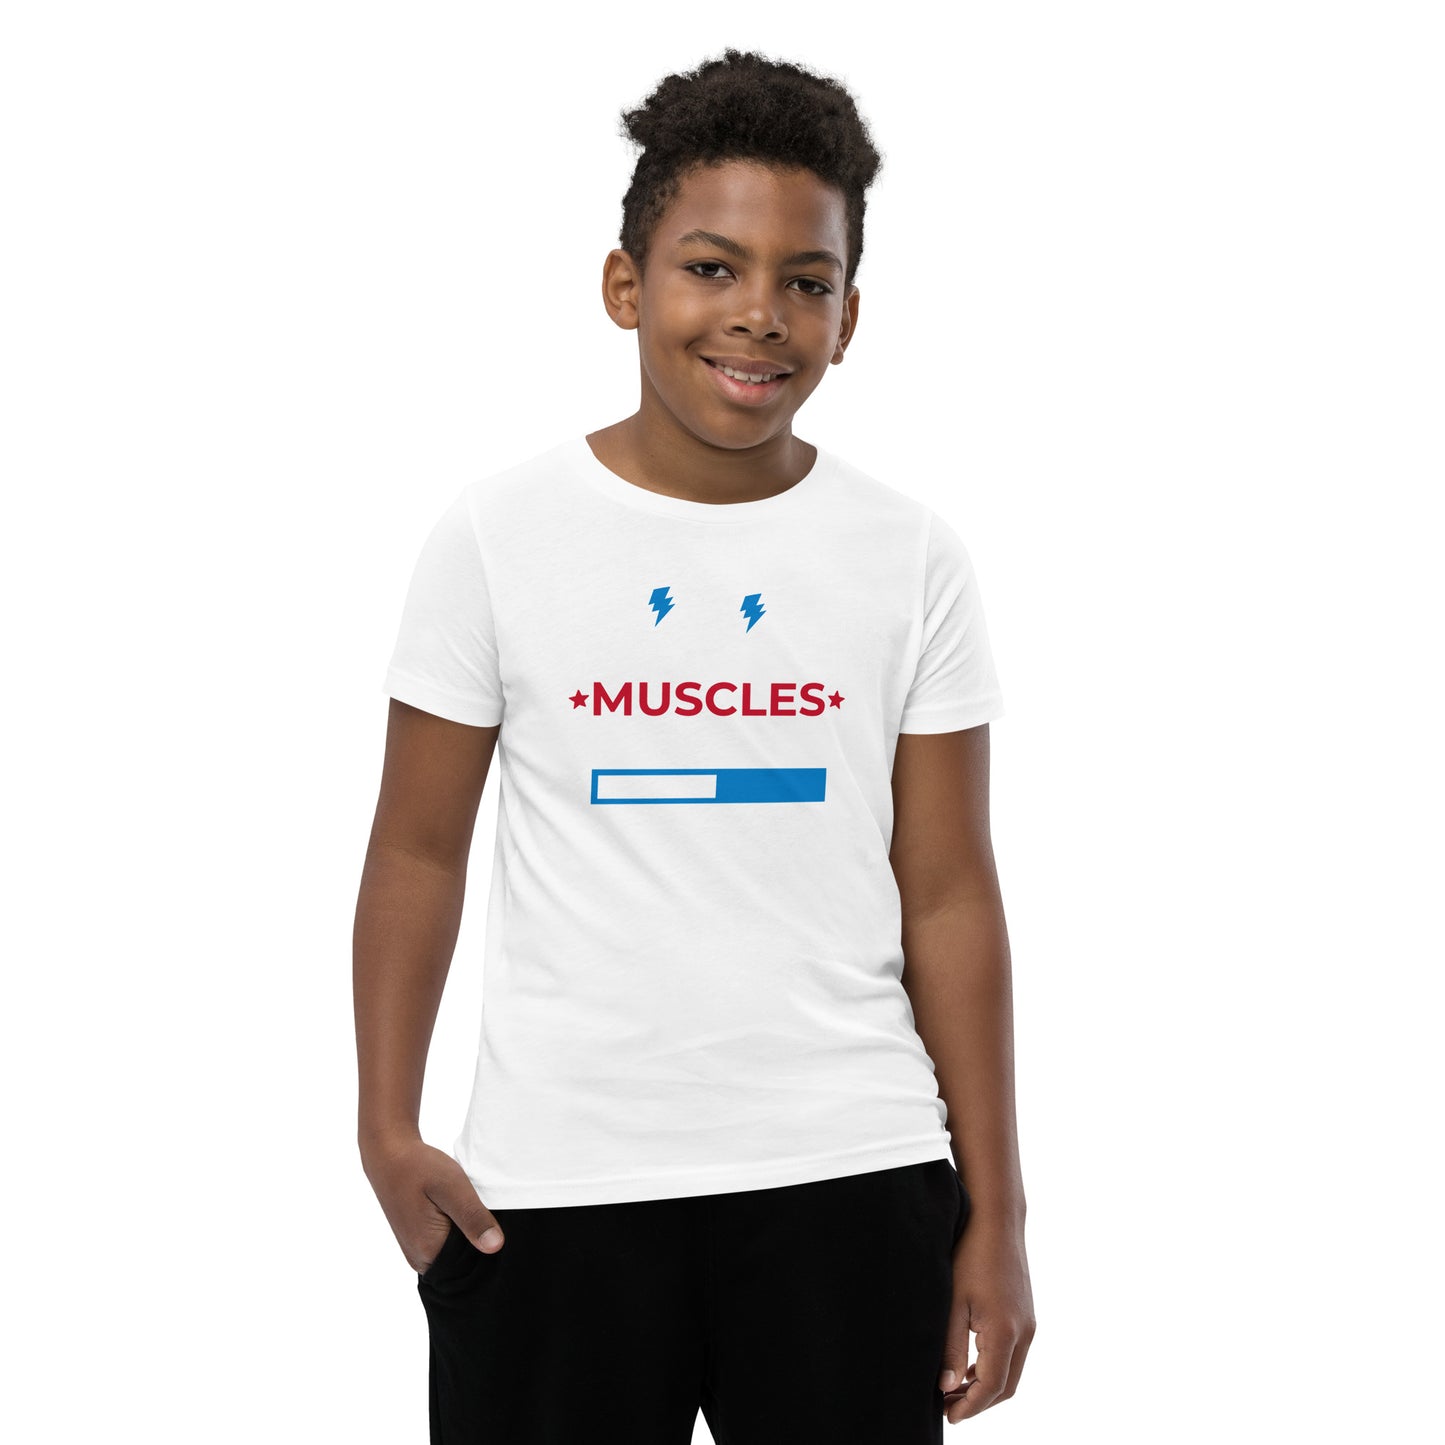 Installing Muscles Youth Short Sleeve T-Shirt